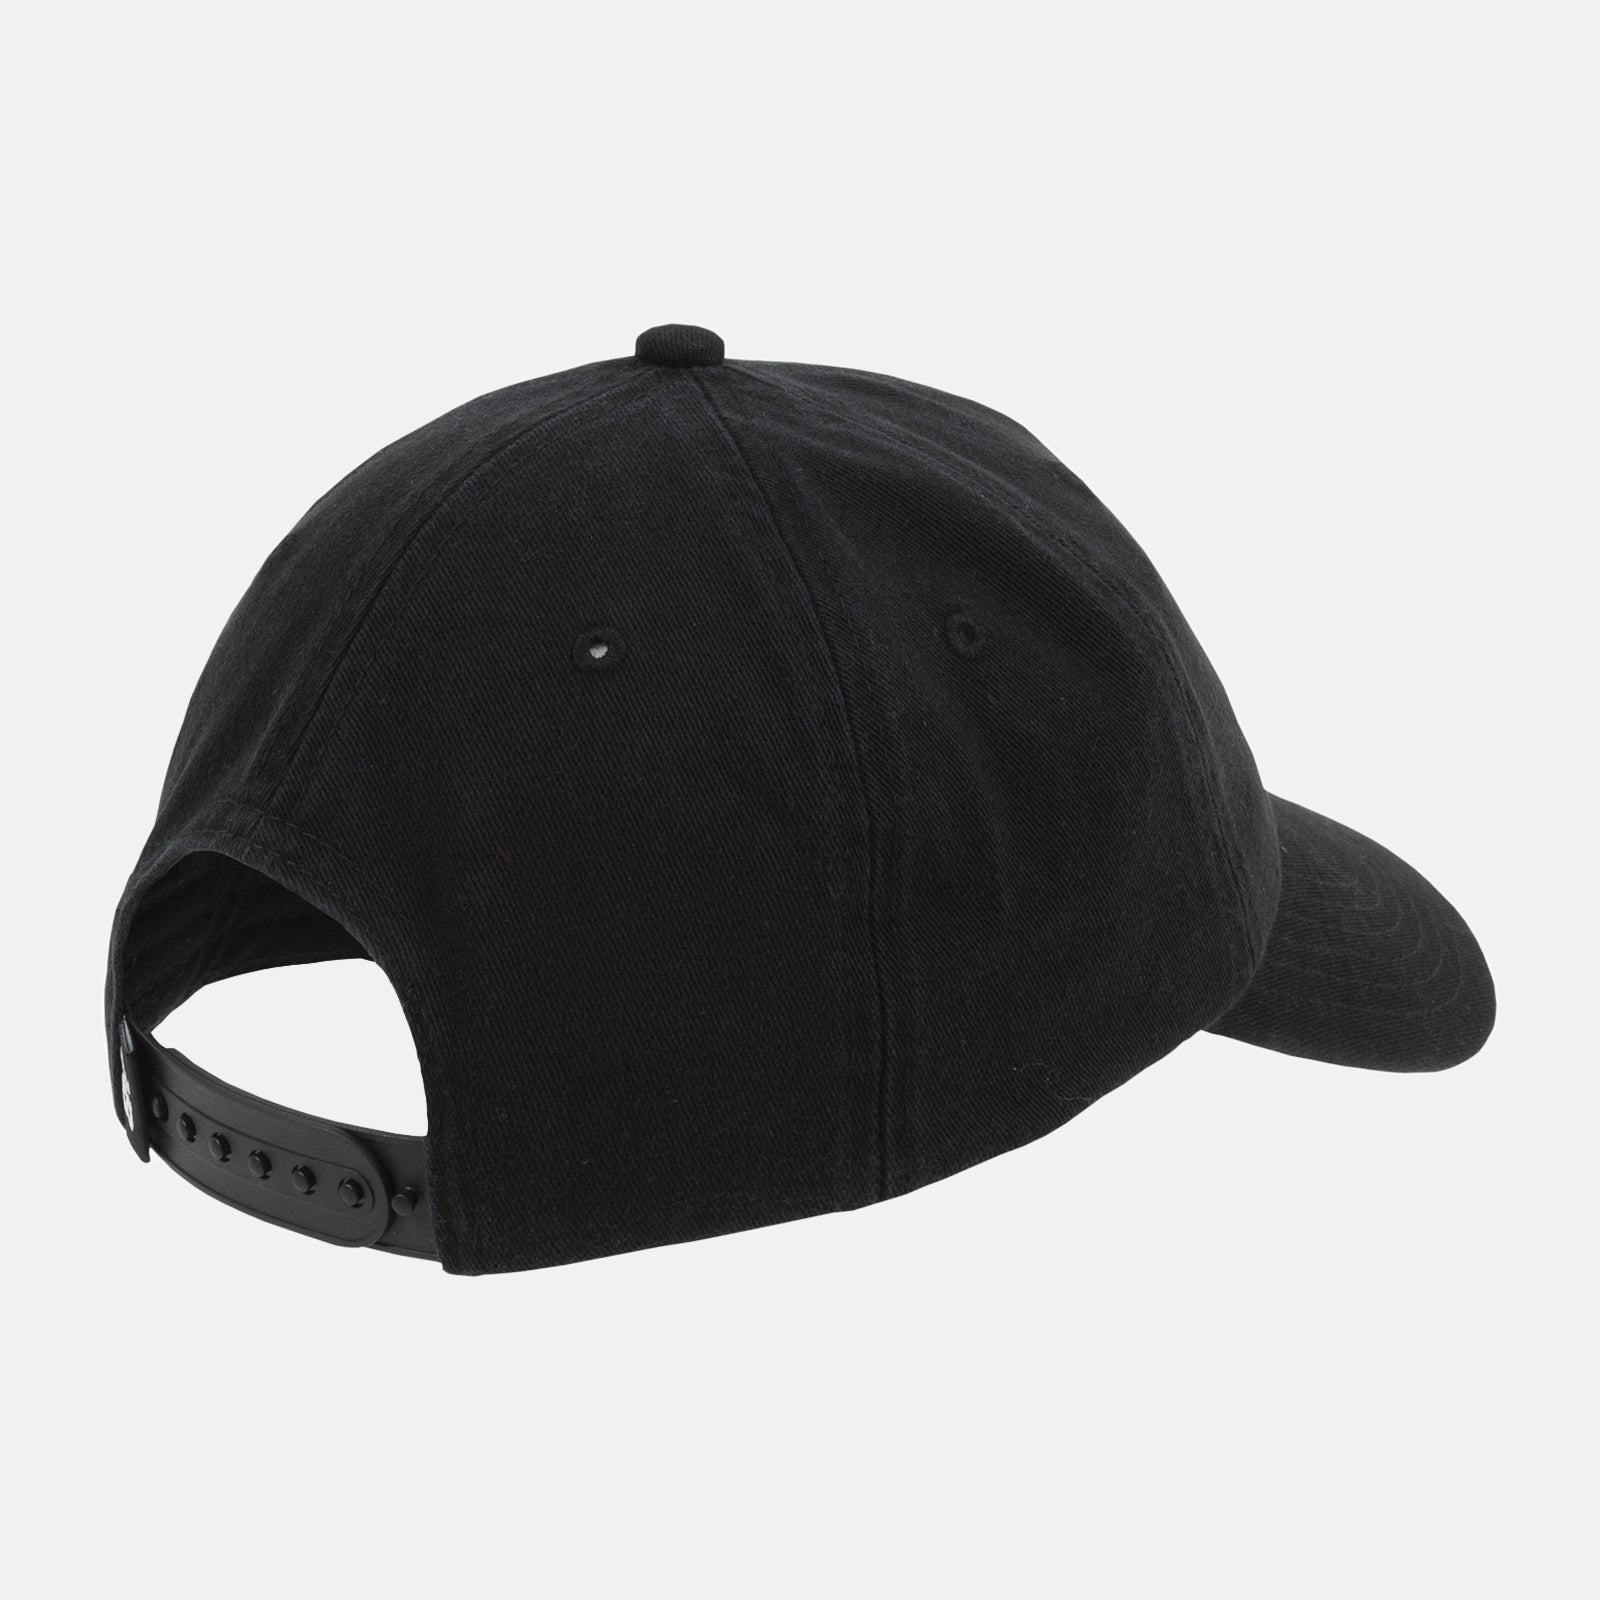 NEW BALANCE Kid's Classic Hat in Black LAH03002 O/S BLACK FROM EIGHTYWINGOLD - OFFICIAL BRAND PARTNER